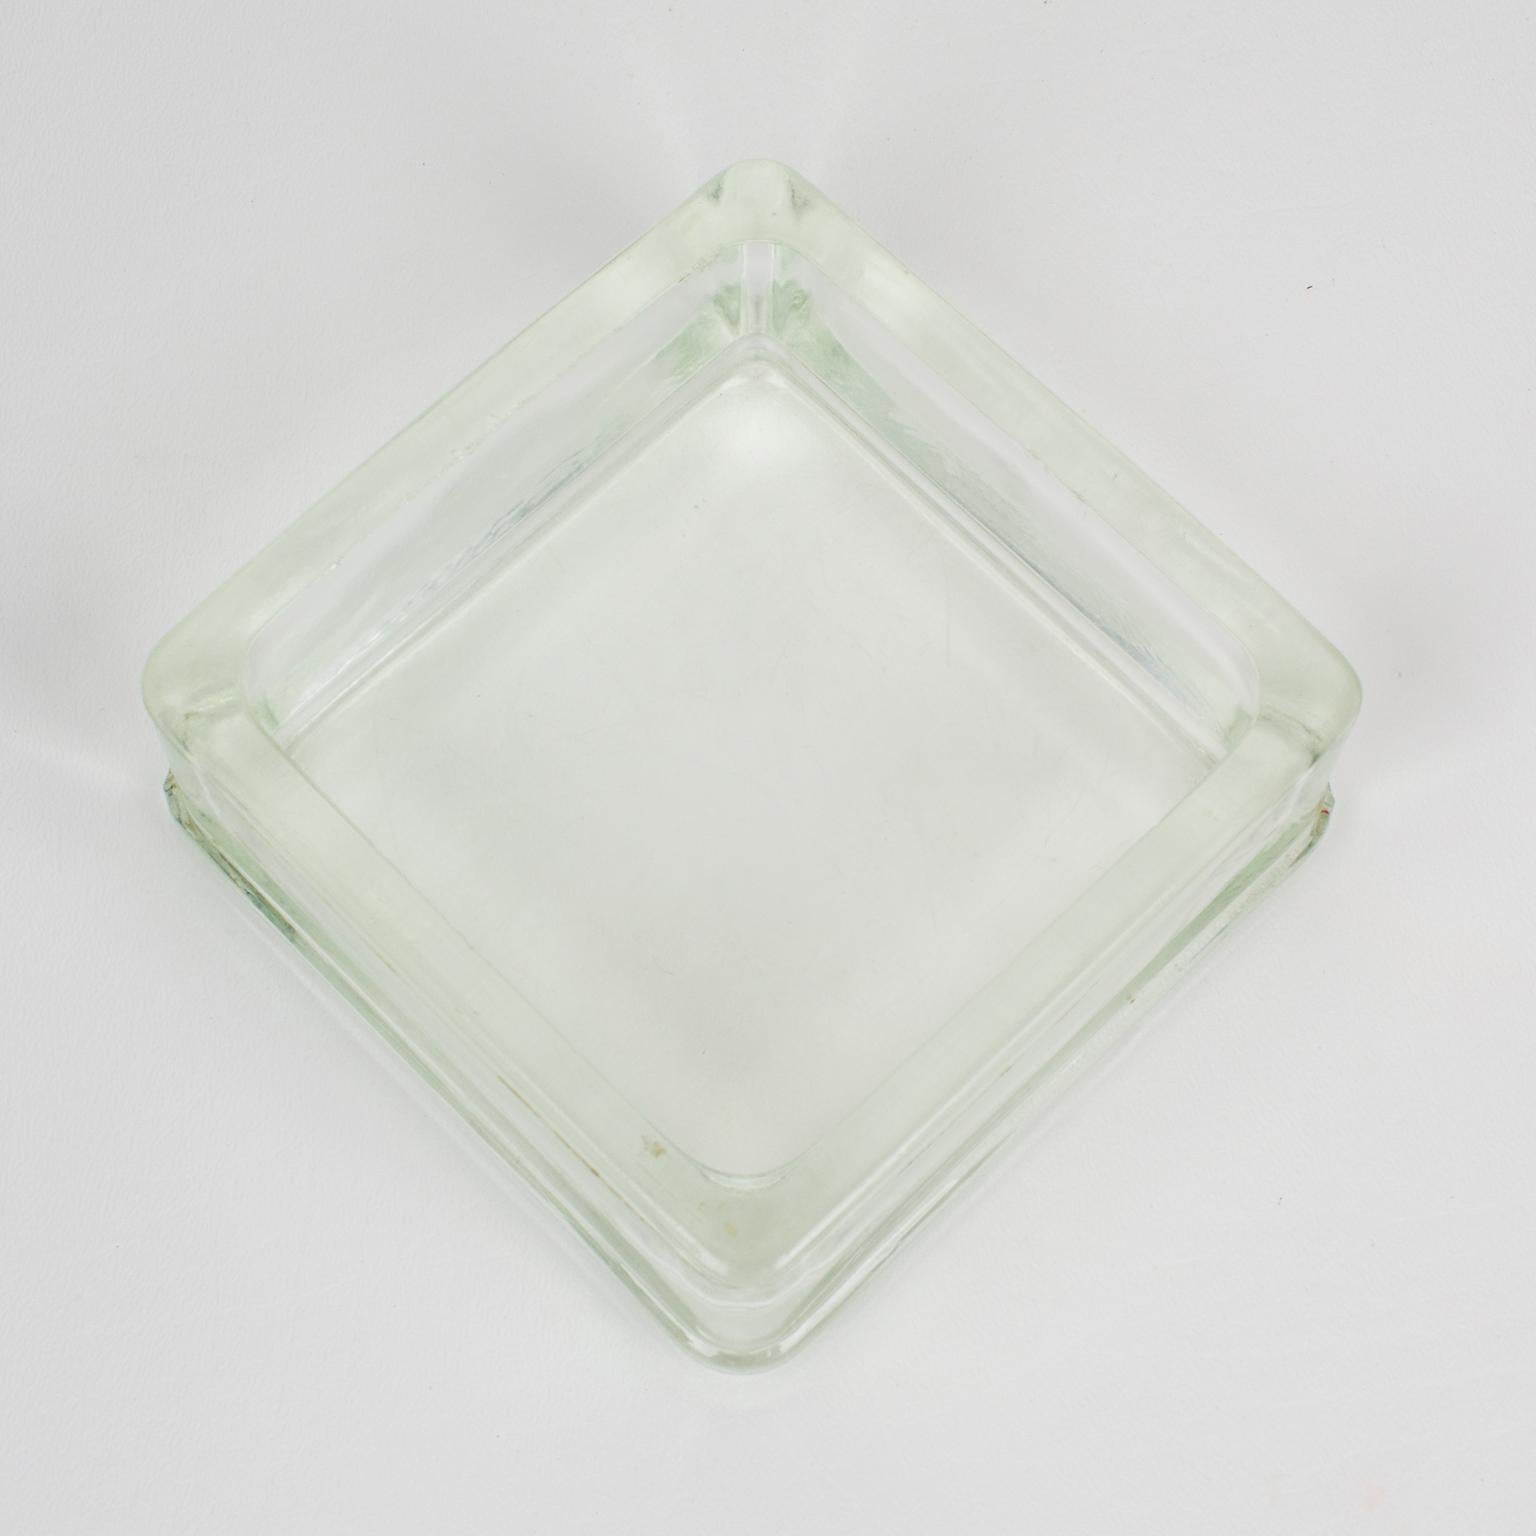 Mid-Century Modern Designed by Le Corbusier for Lumax Molded Glass Desk Accessory Ashtray Catchall